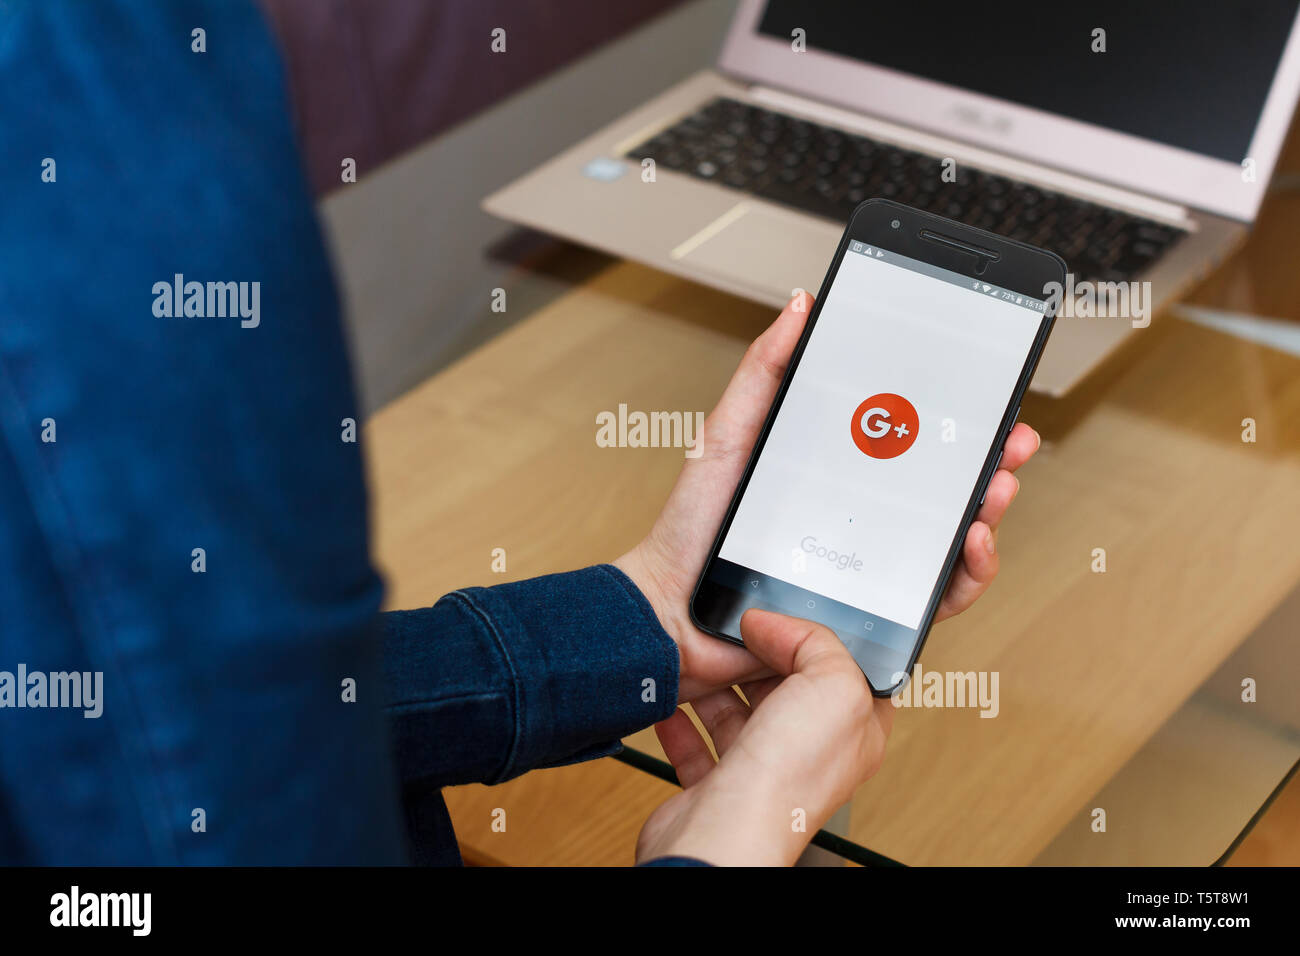 SAN FRANCISCO, US - 22 April 2019: Close up to female hands holding smartphone using Google plus for G Suite application, San Francisco, California Stock Photo